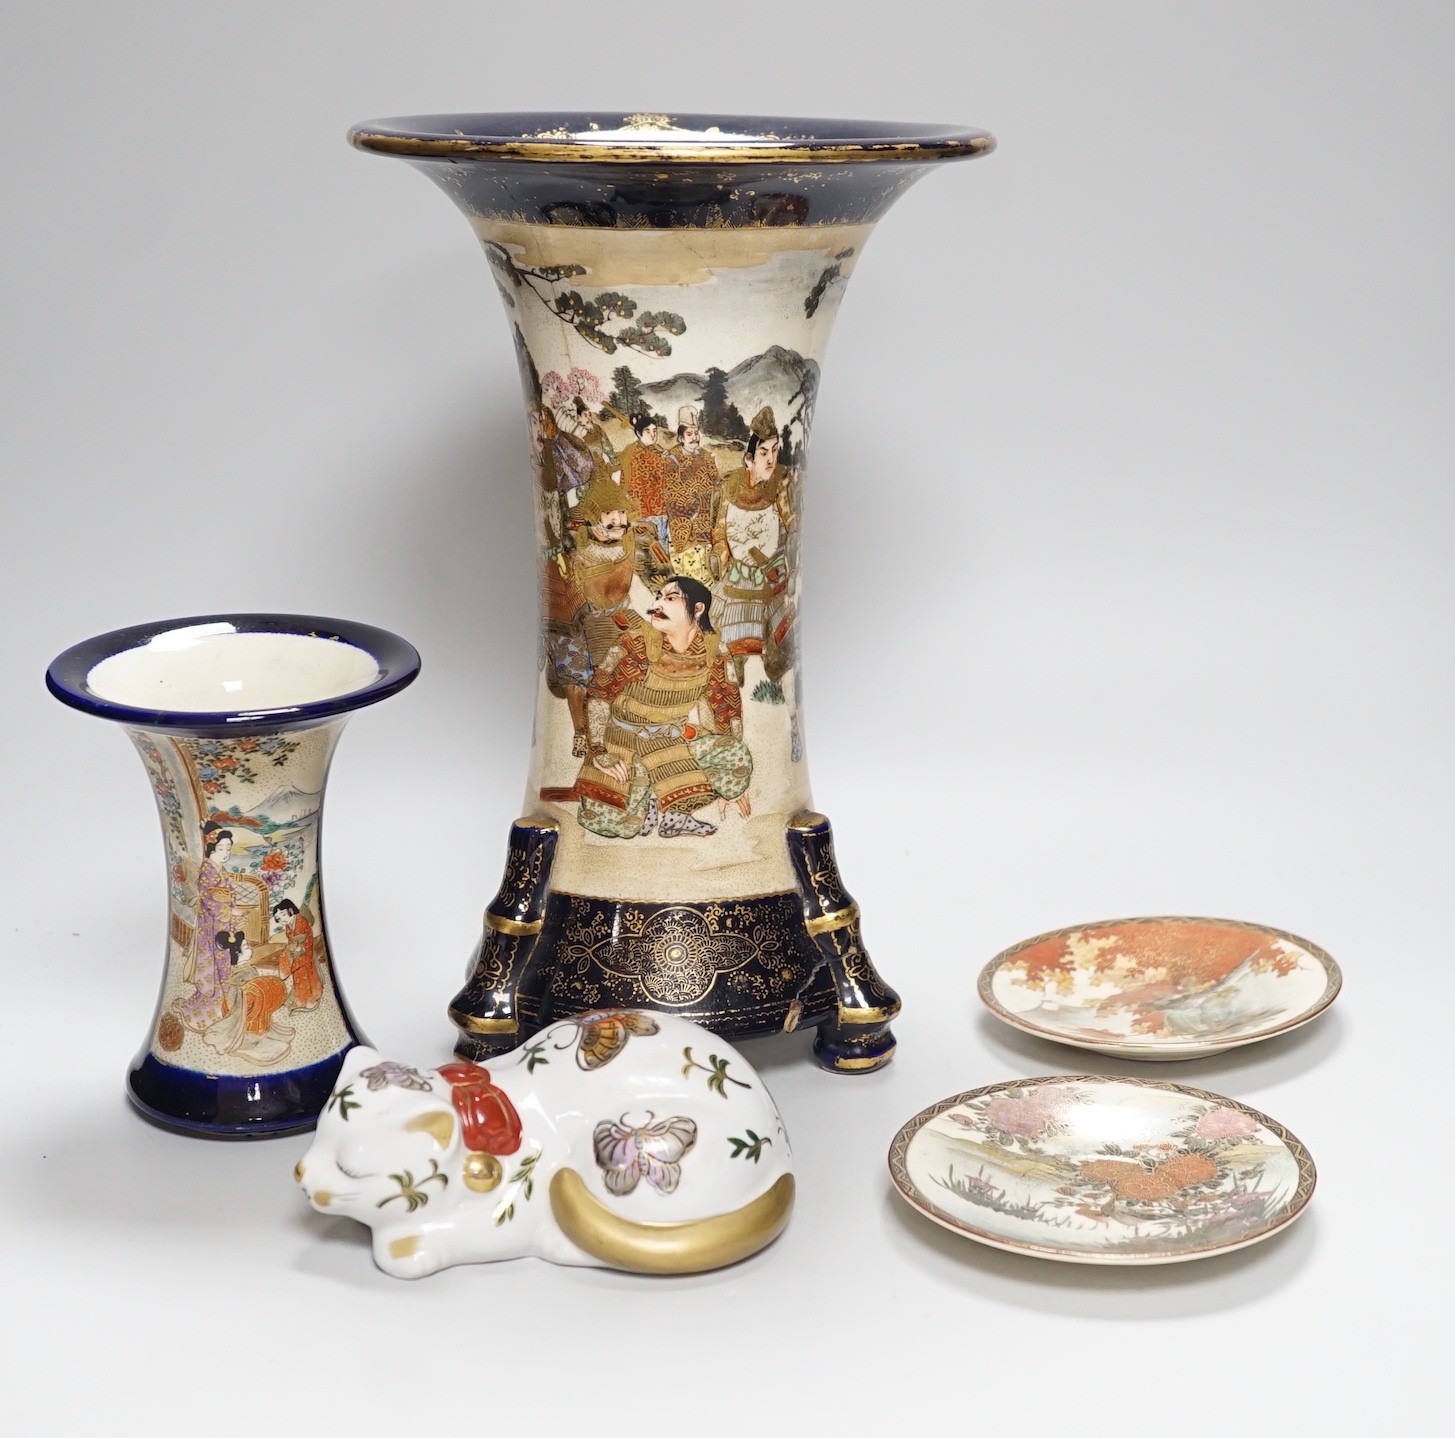 A Japanese Satsuma vase, a smaller vase two saucers and a cat, tallest vase 30cms high